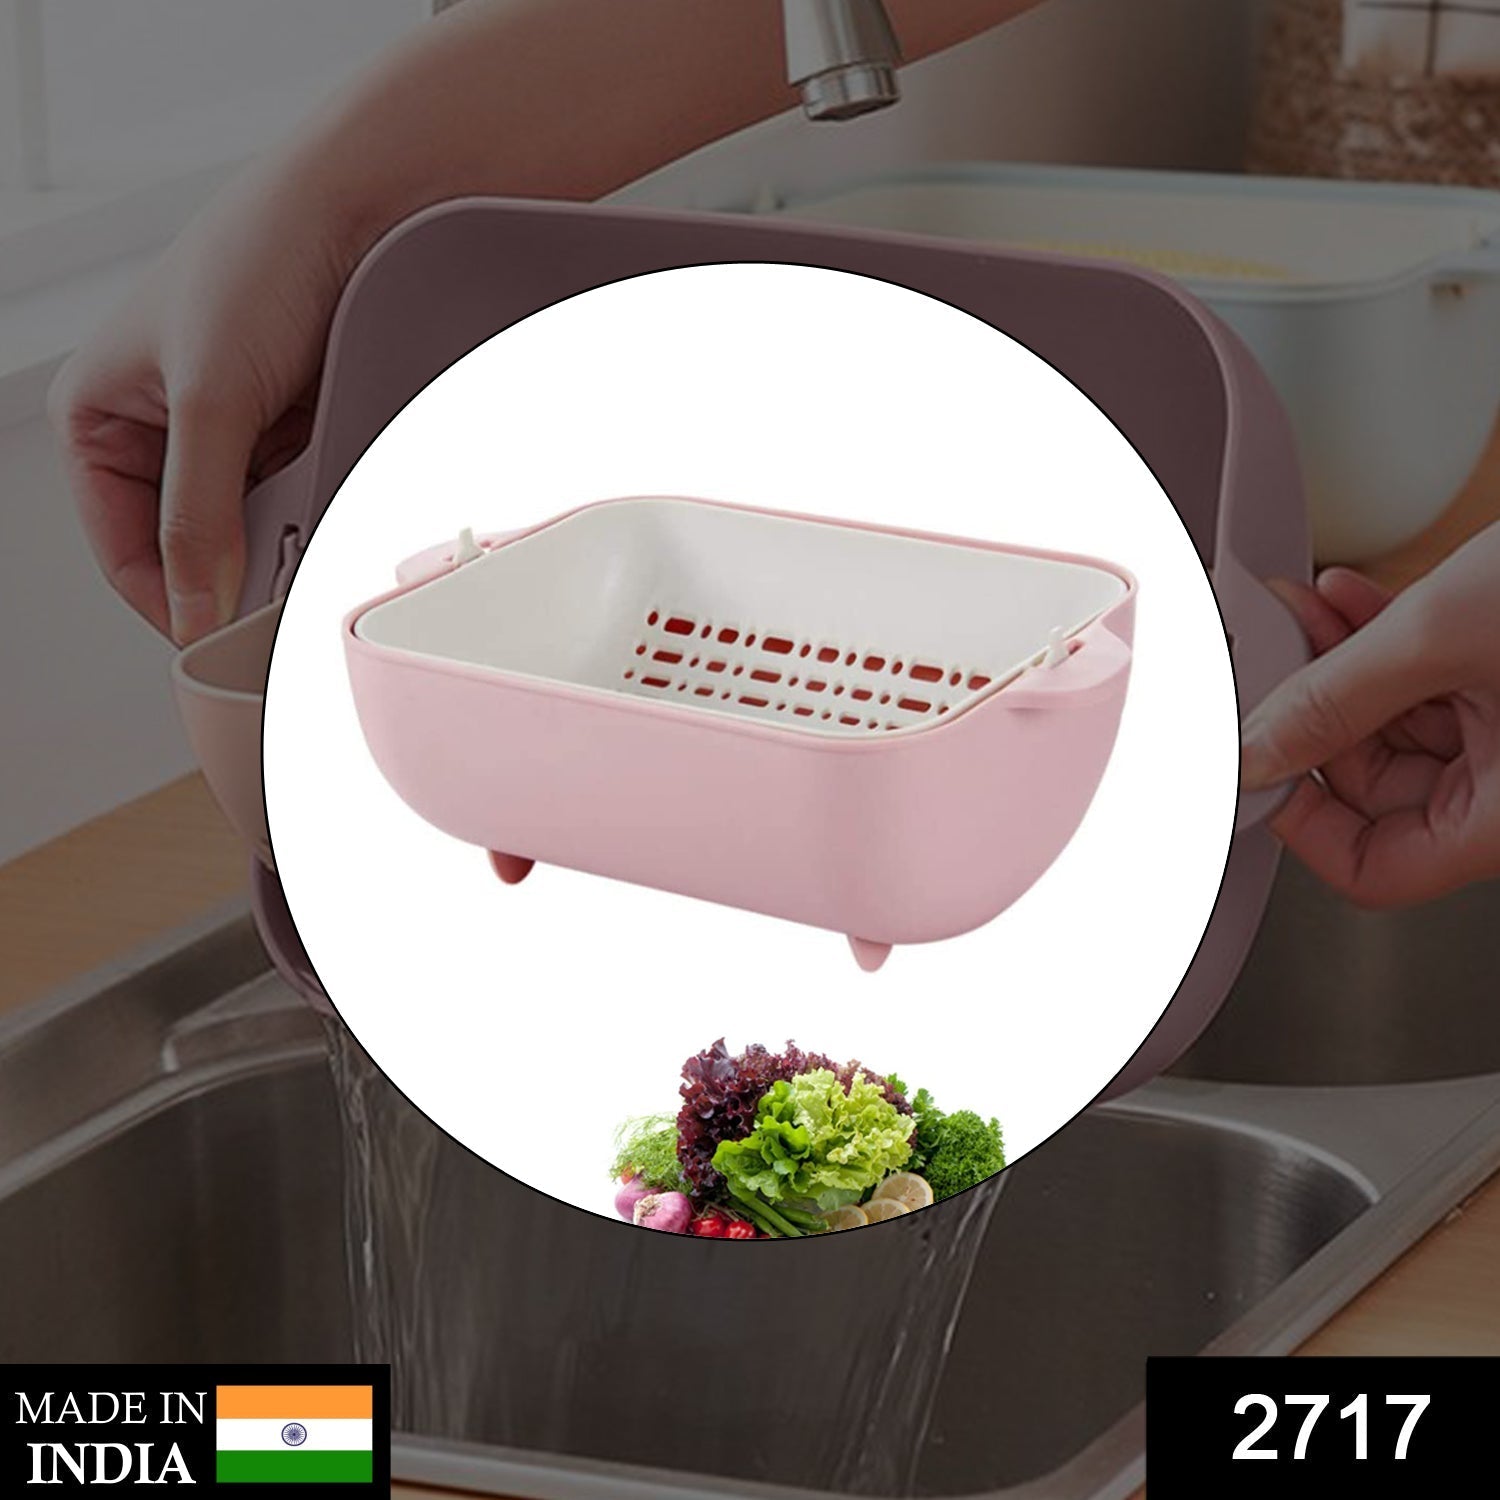 2717 Multifunctional BPA Free Double Layered Plastic Rotatable Strainer Bowl with Handles for Washing, Rinsing, Serving Vegetables & Fruits (Multicolor) DeoDap